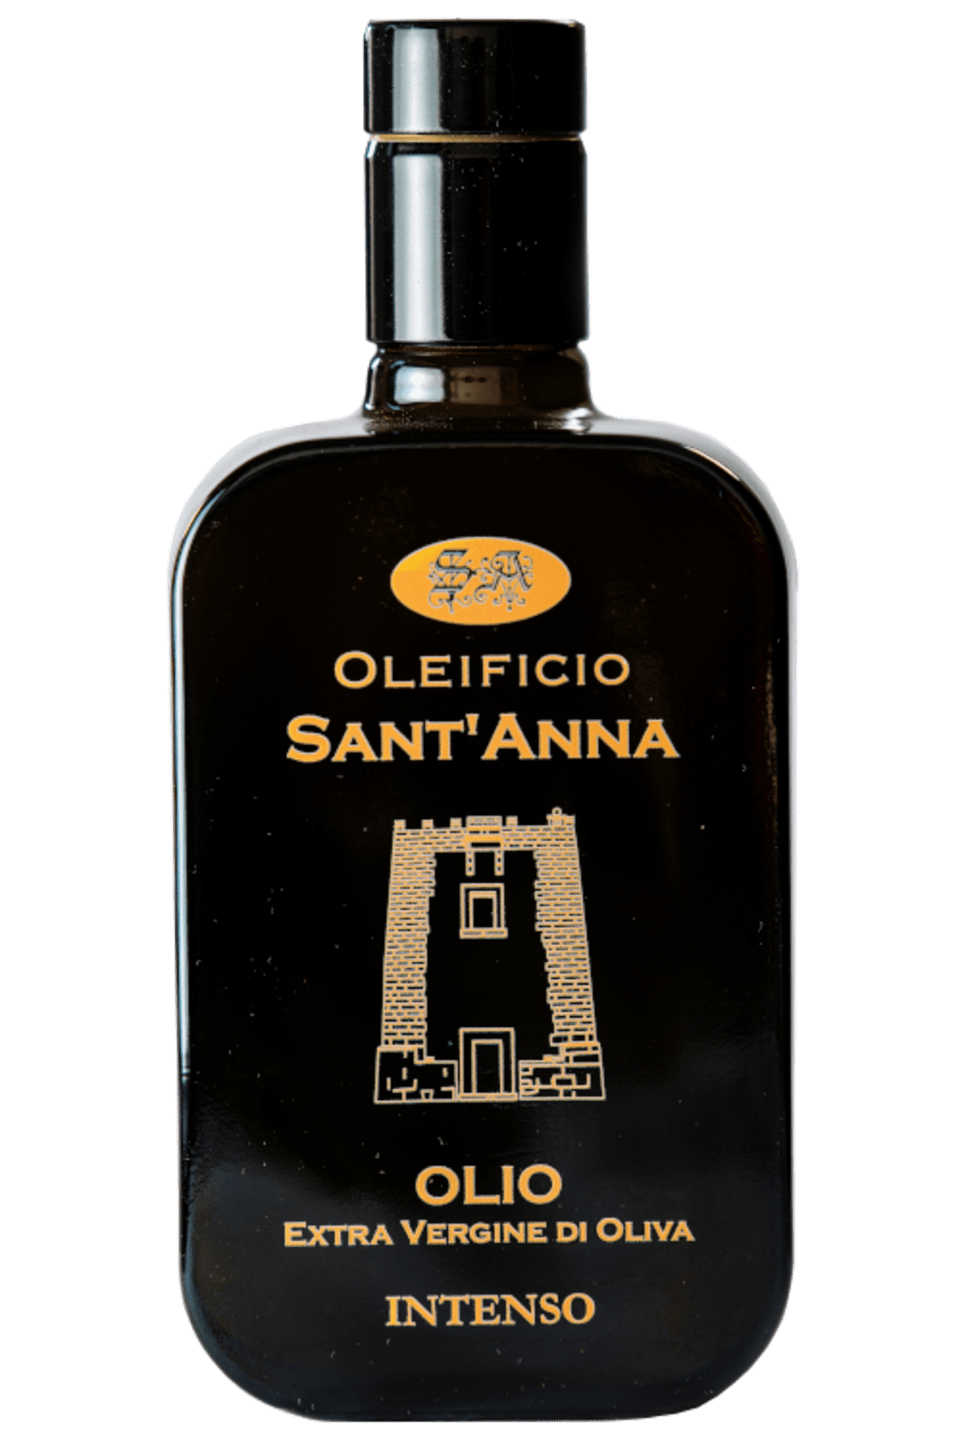 STRONG EXTRAVIRGIN OLIVE OIL - 100% PRODUCT OF ITALY